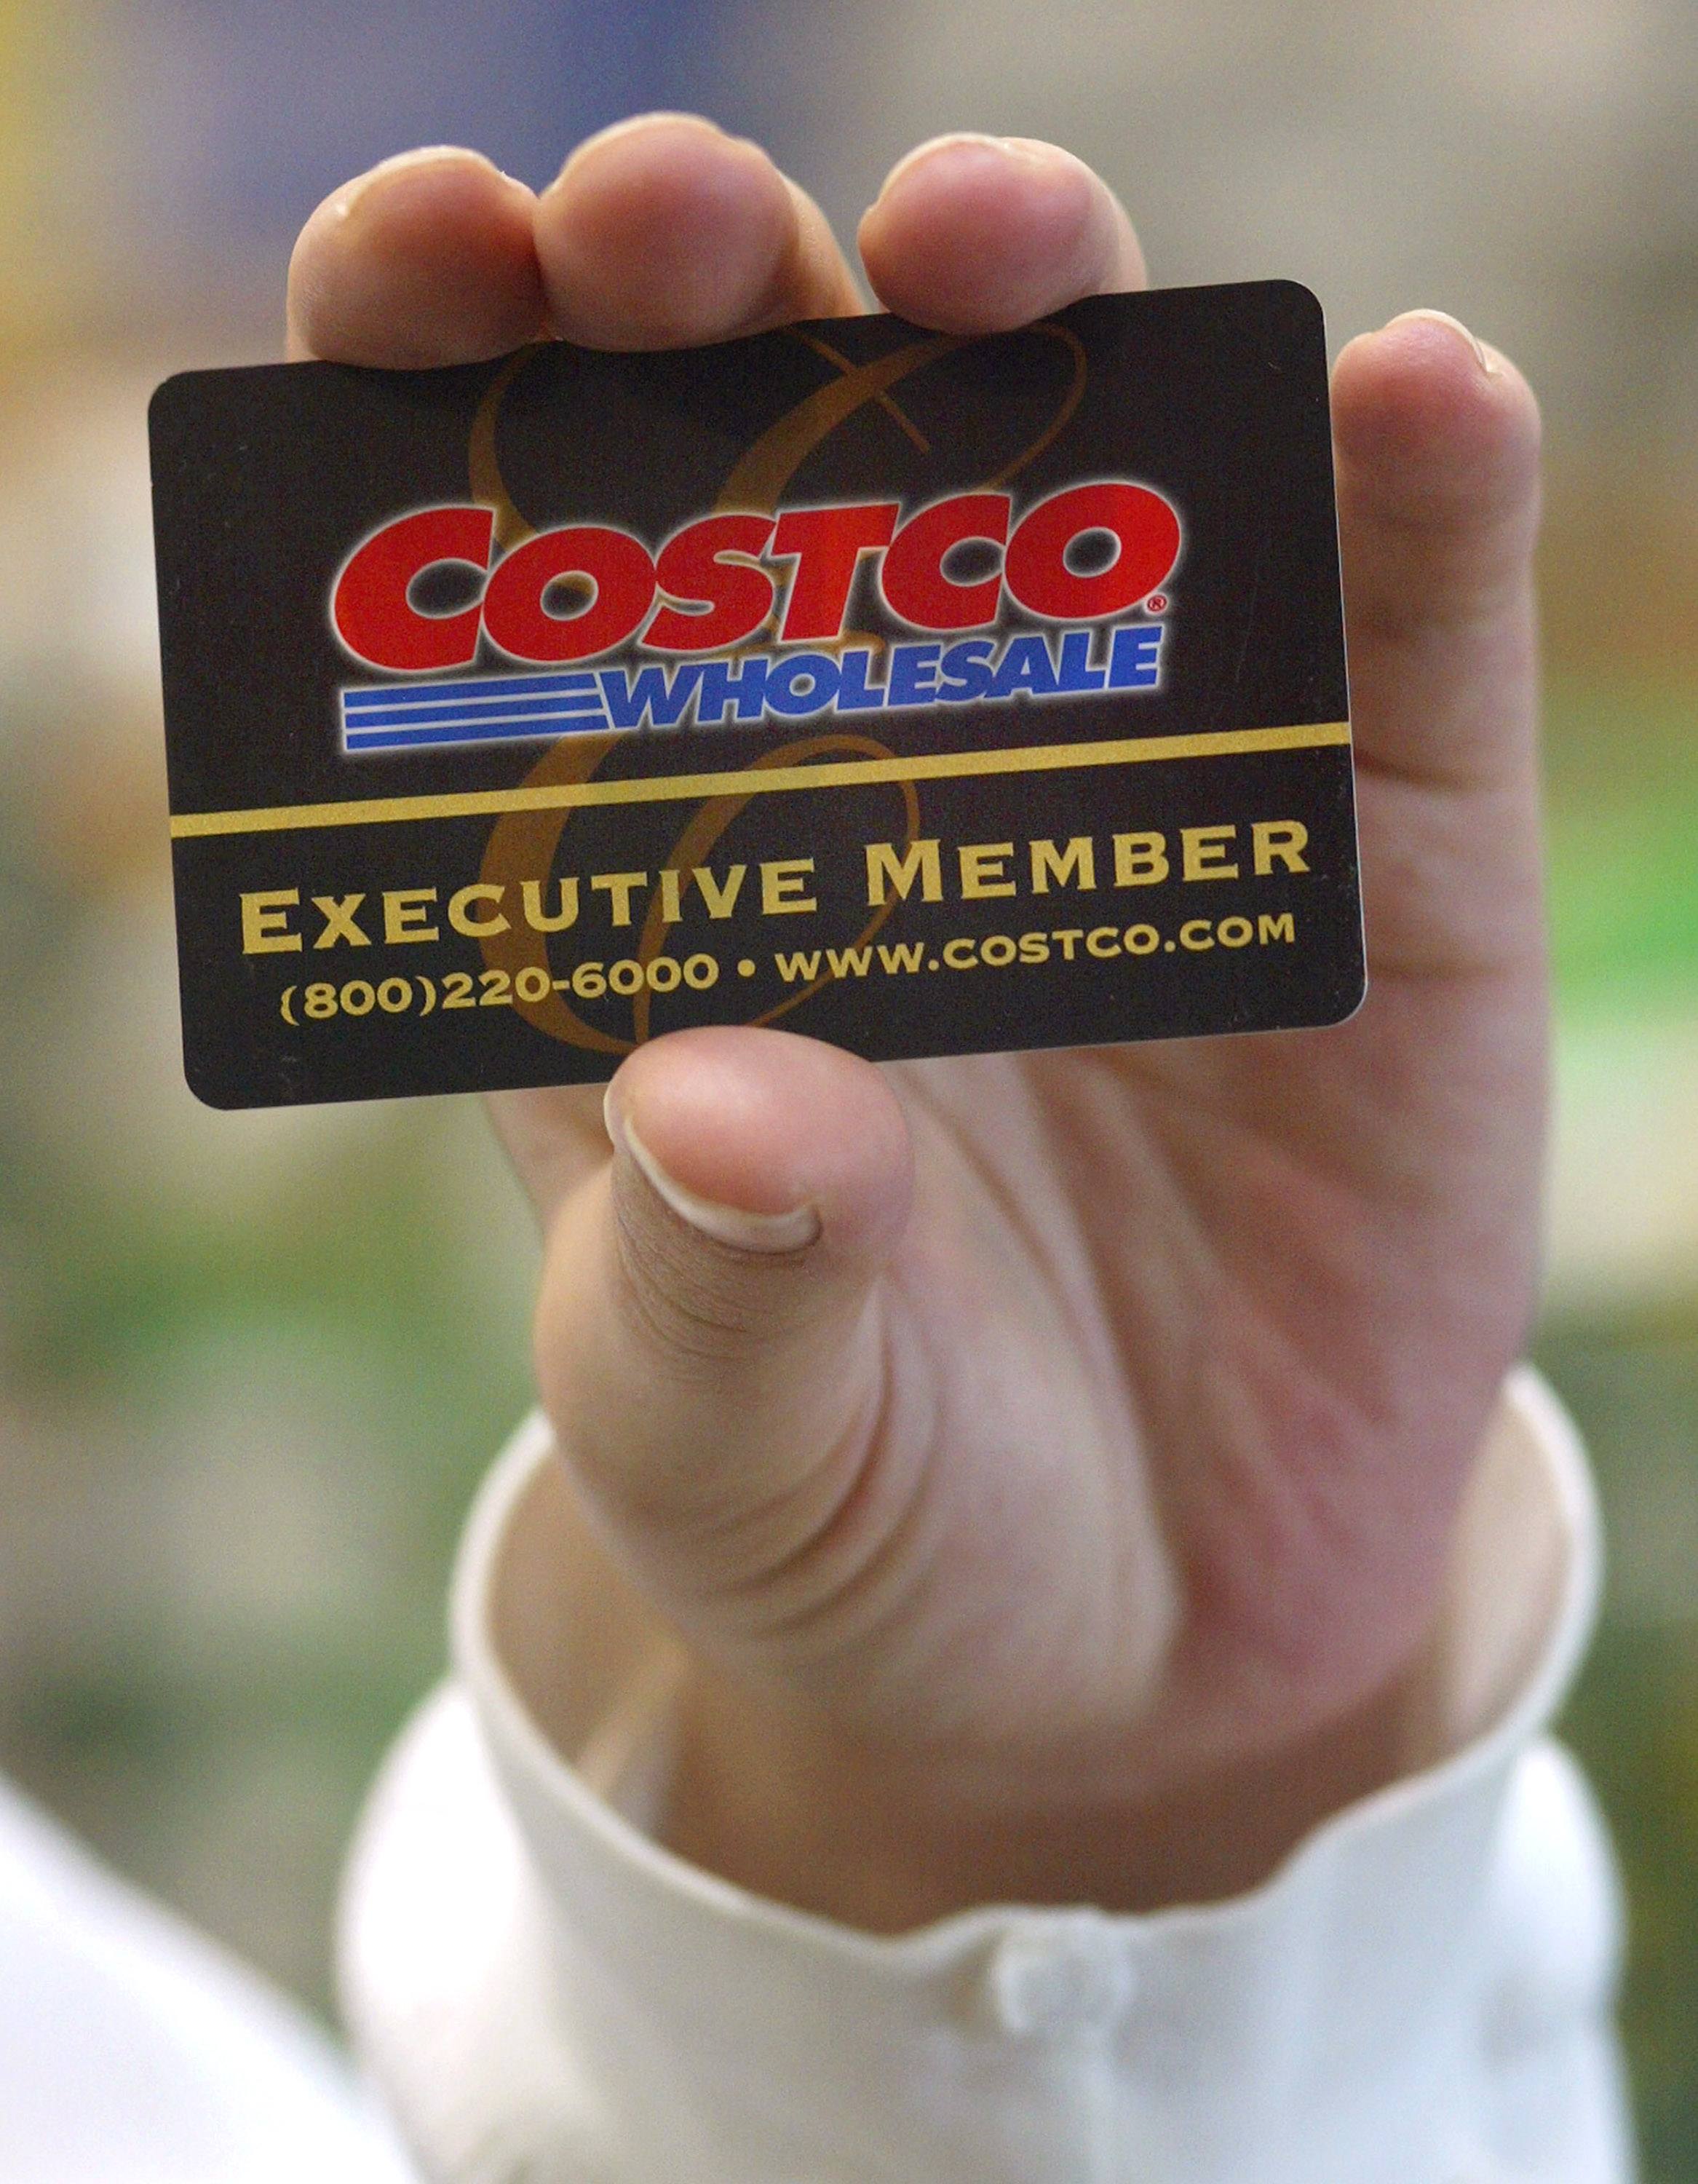 Smart Money Questions You Need to Ask Before Getting a Costco Membership